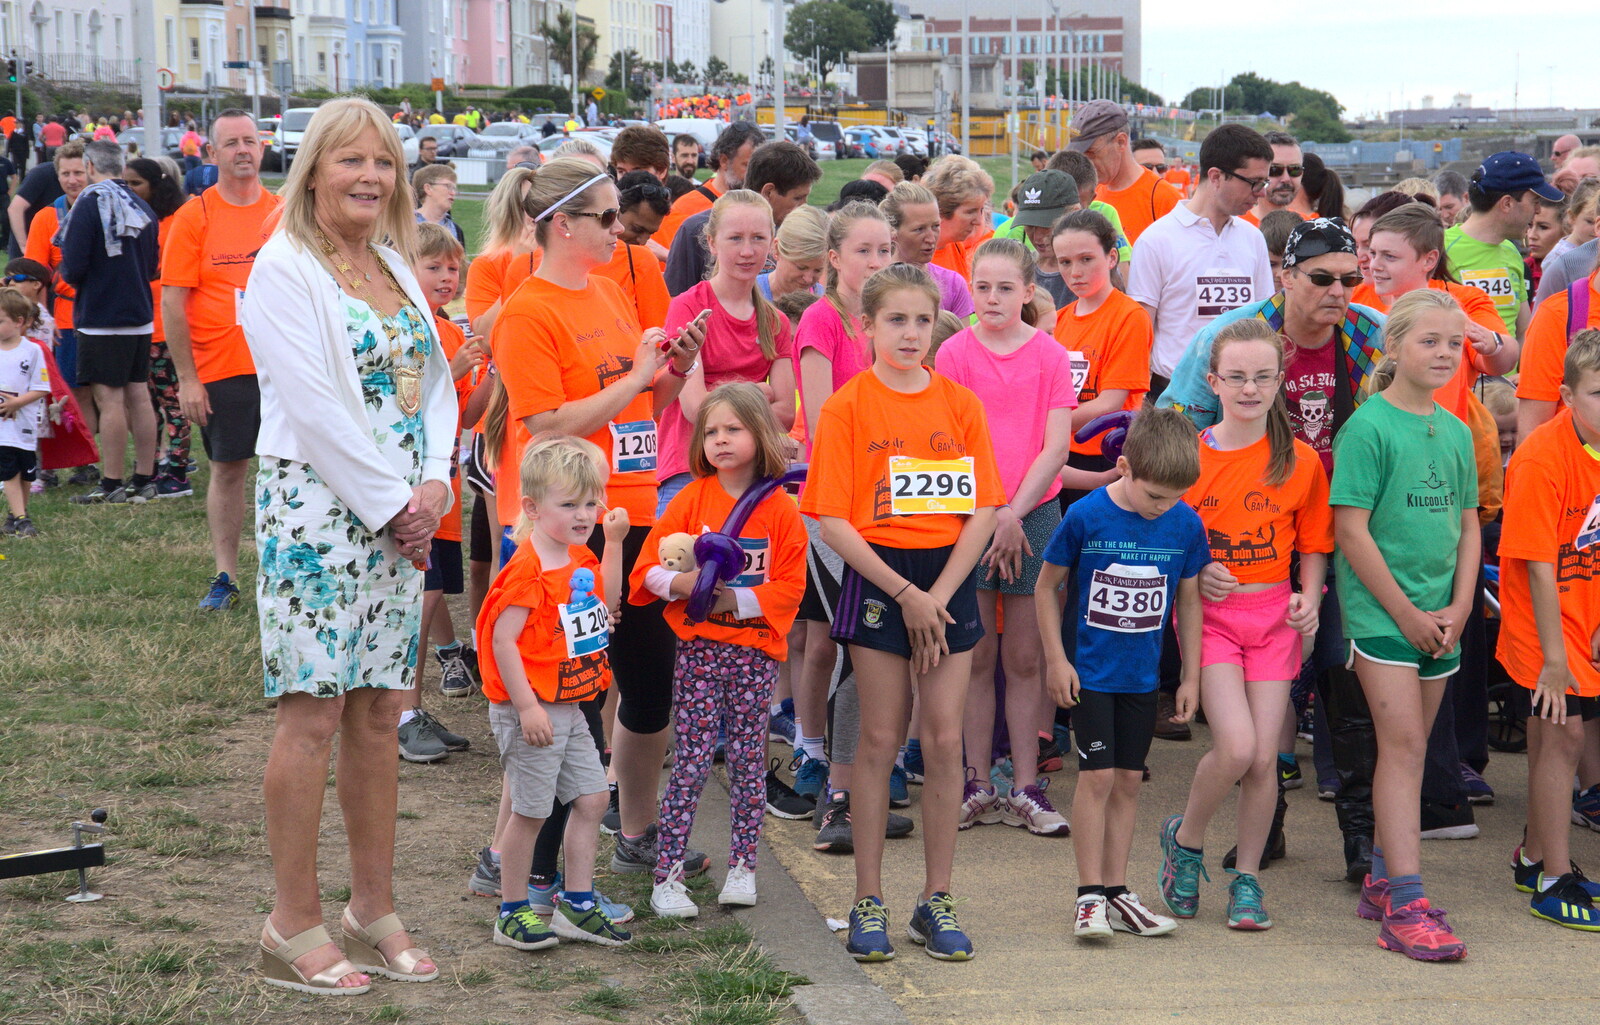 The mayor is on hand to start the 1.5k family run from The Dún Laoghaire 10k Run, County Dublin, Ireland - 6th August 2018